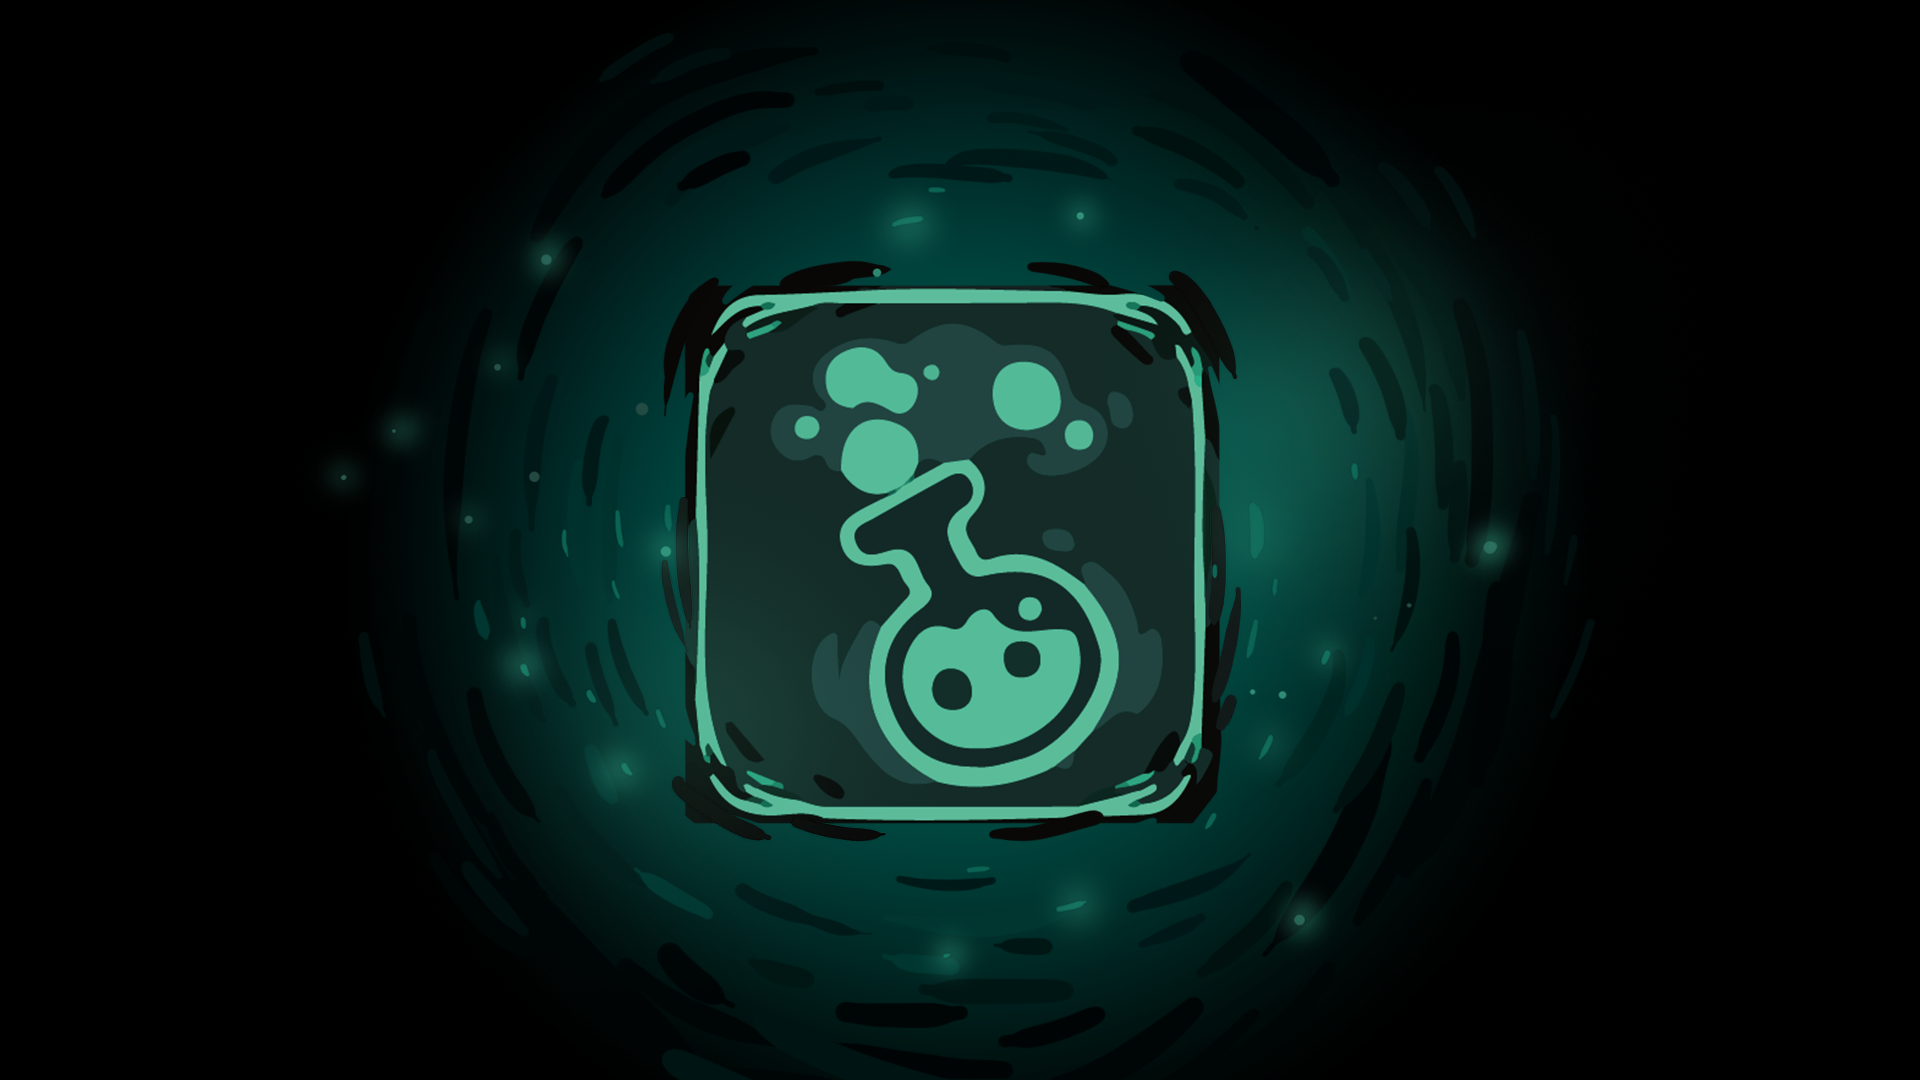 Icon for Poison Expert